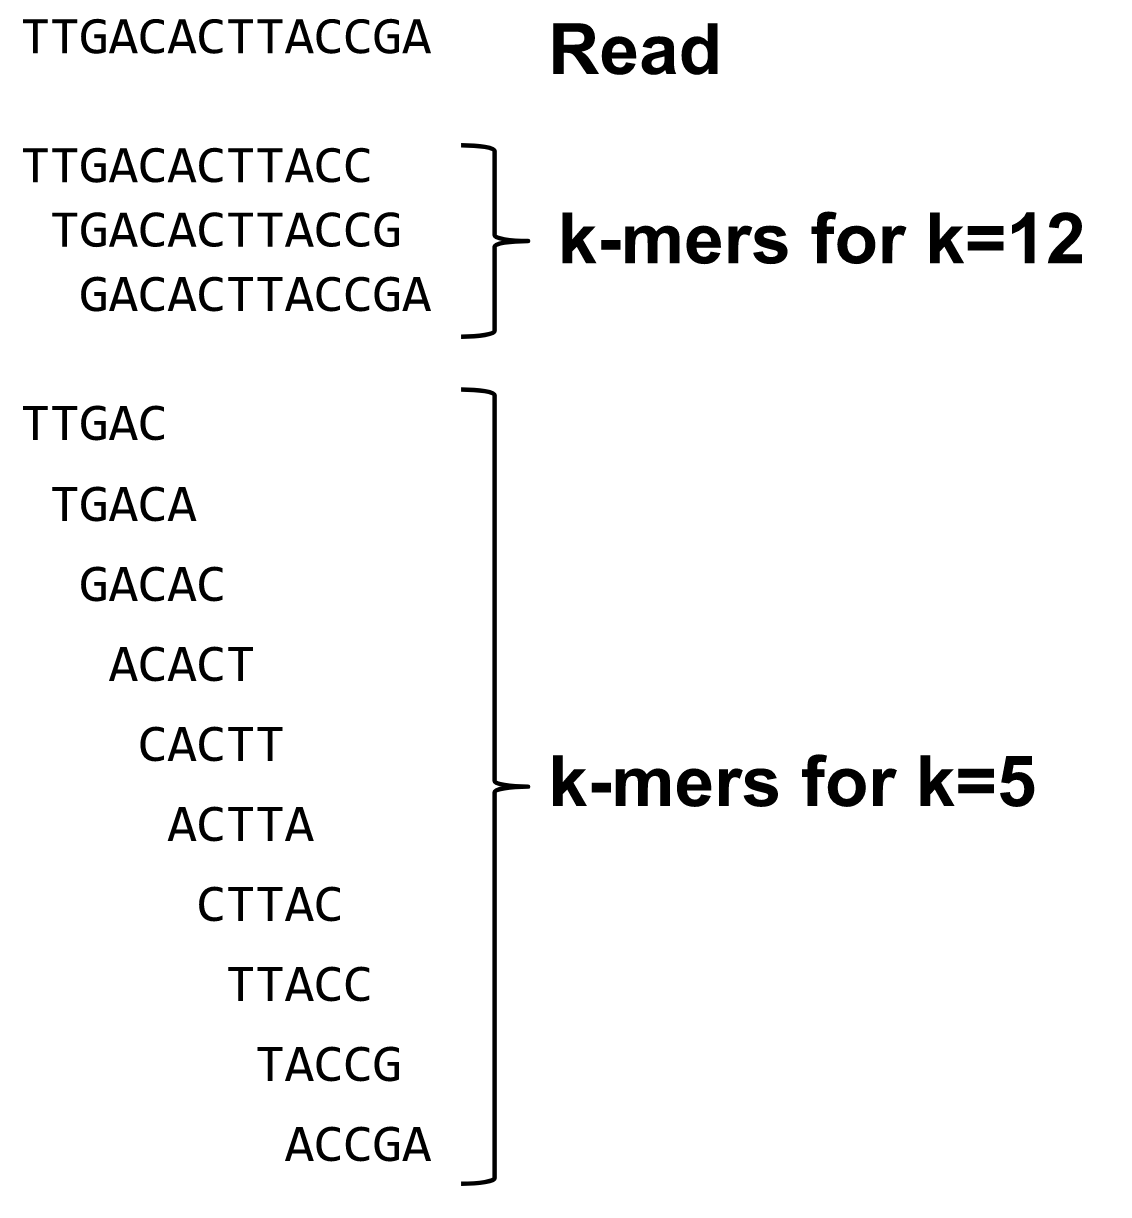 k=12 kmers show three sequences with length 12 overlapping. For k=5 10 different shorter sequences are shown.